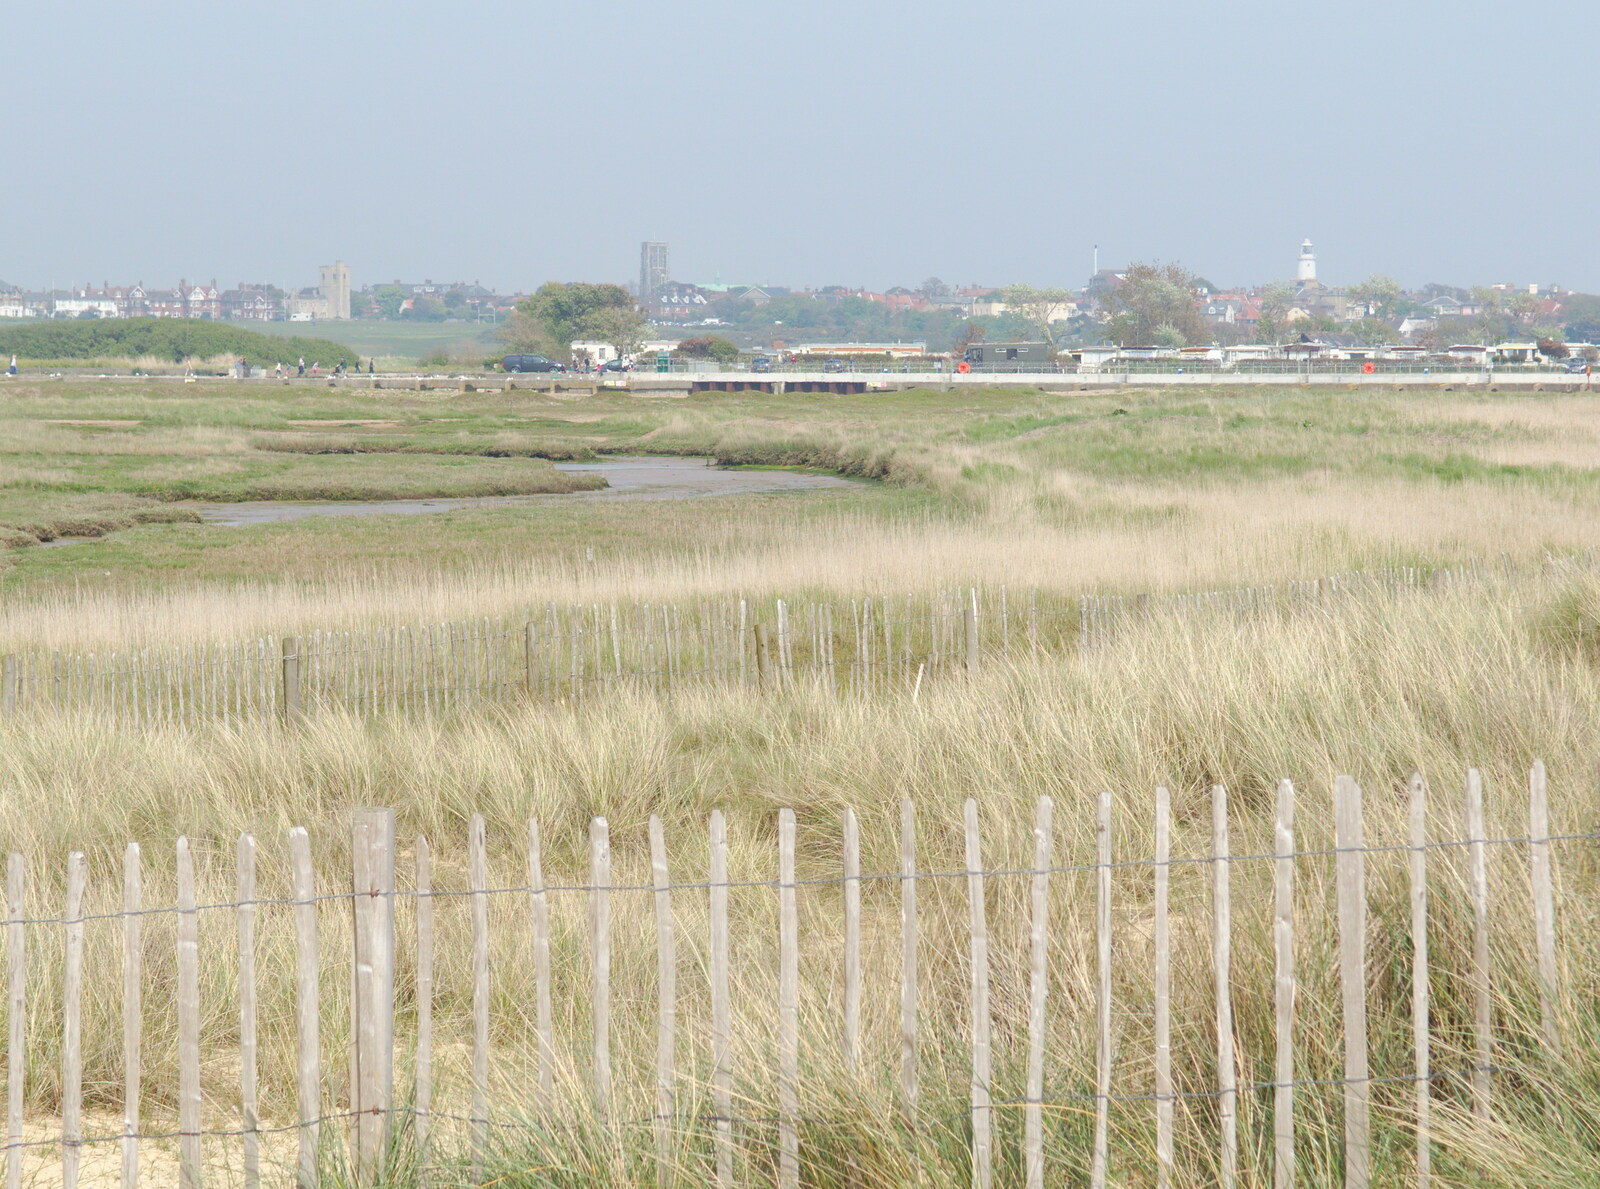 The view over the marshes to Southwold from Life's A Windy Beach, Walberswick, Suffolk - 5th May 2014